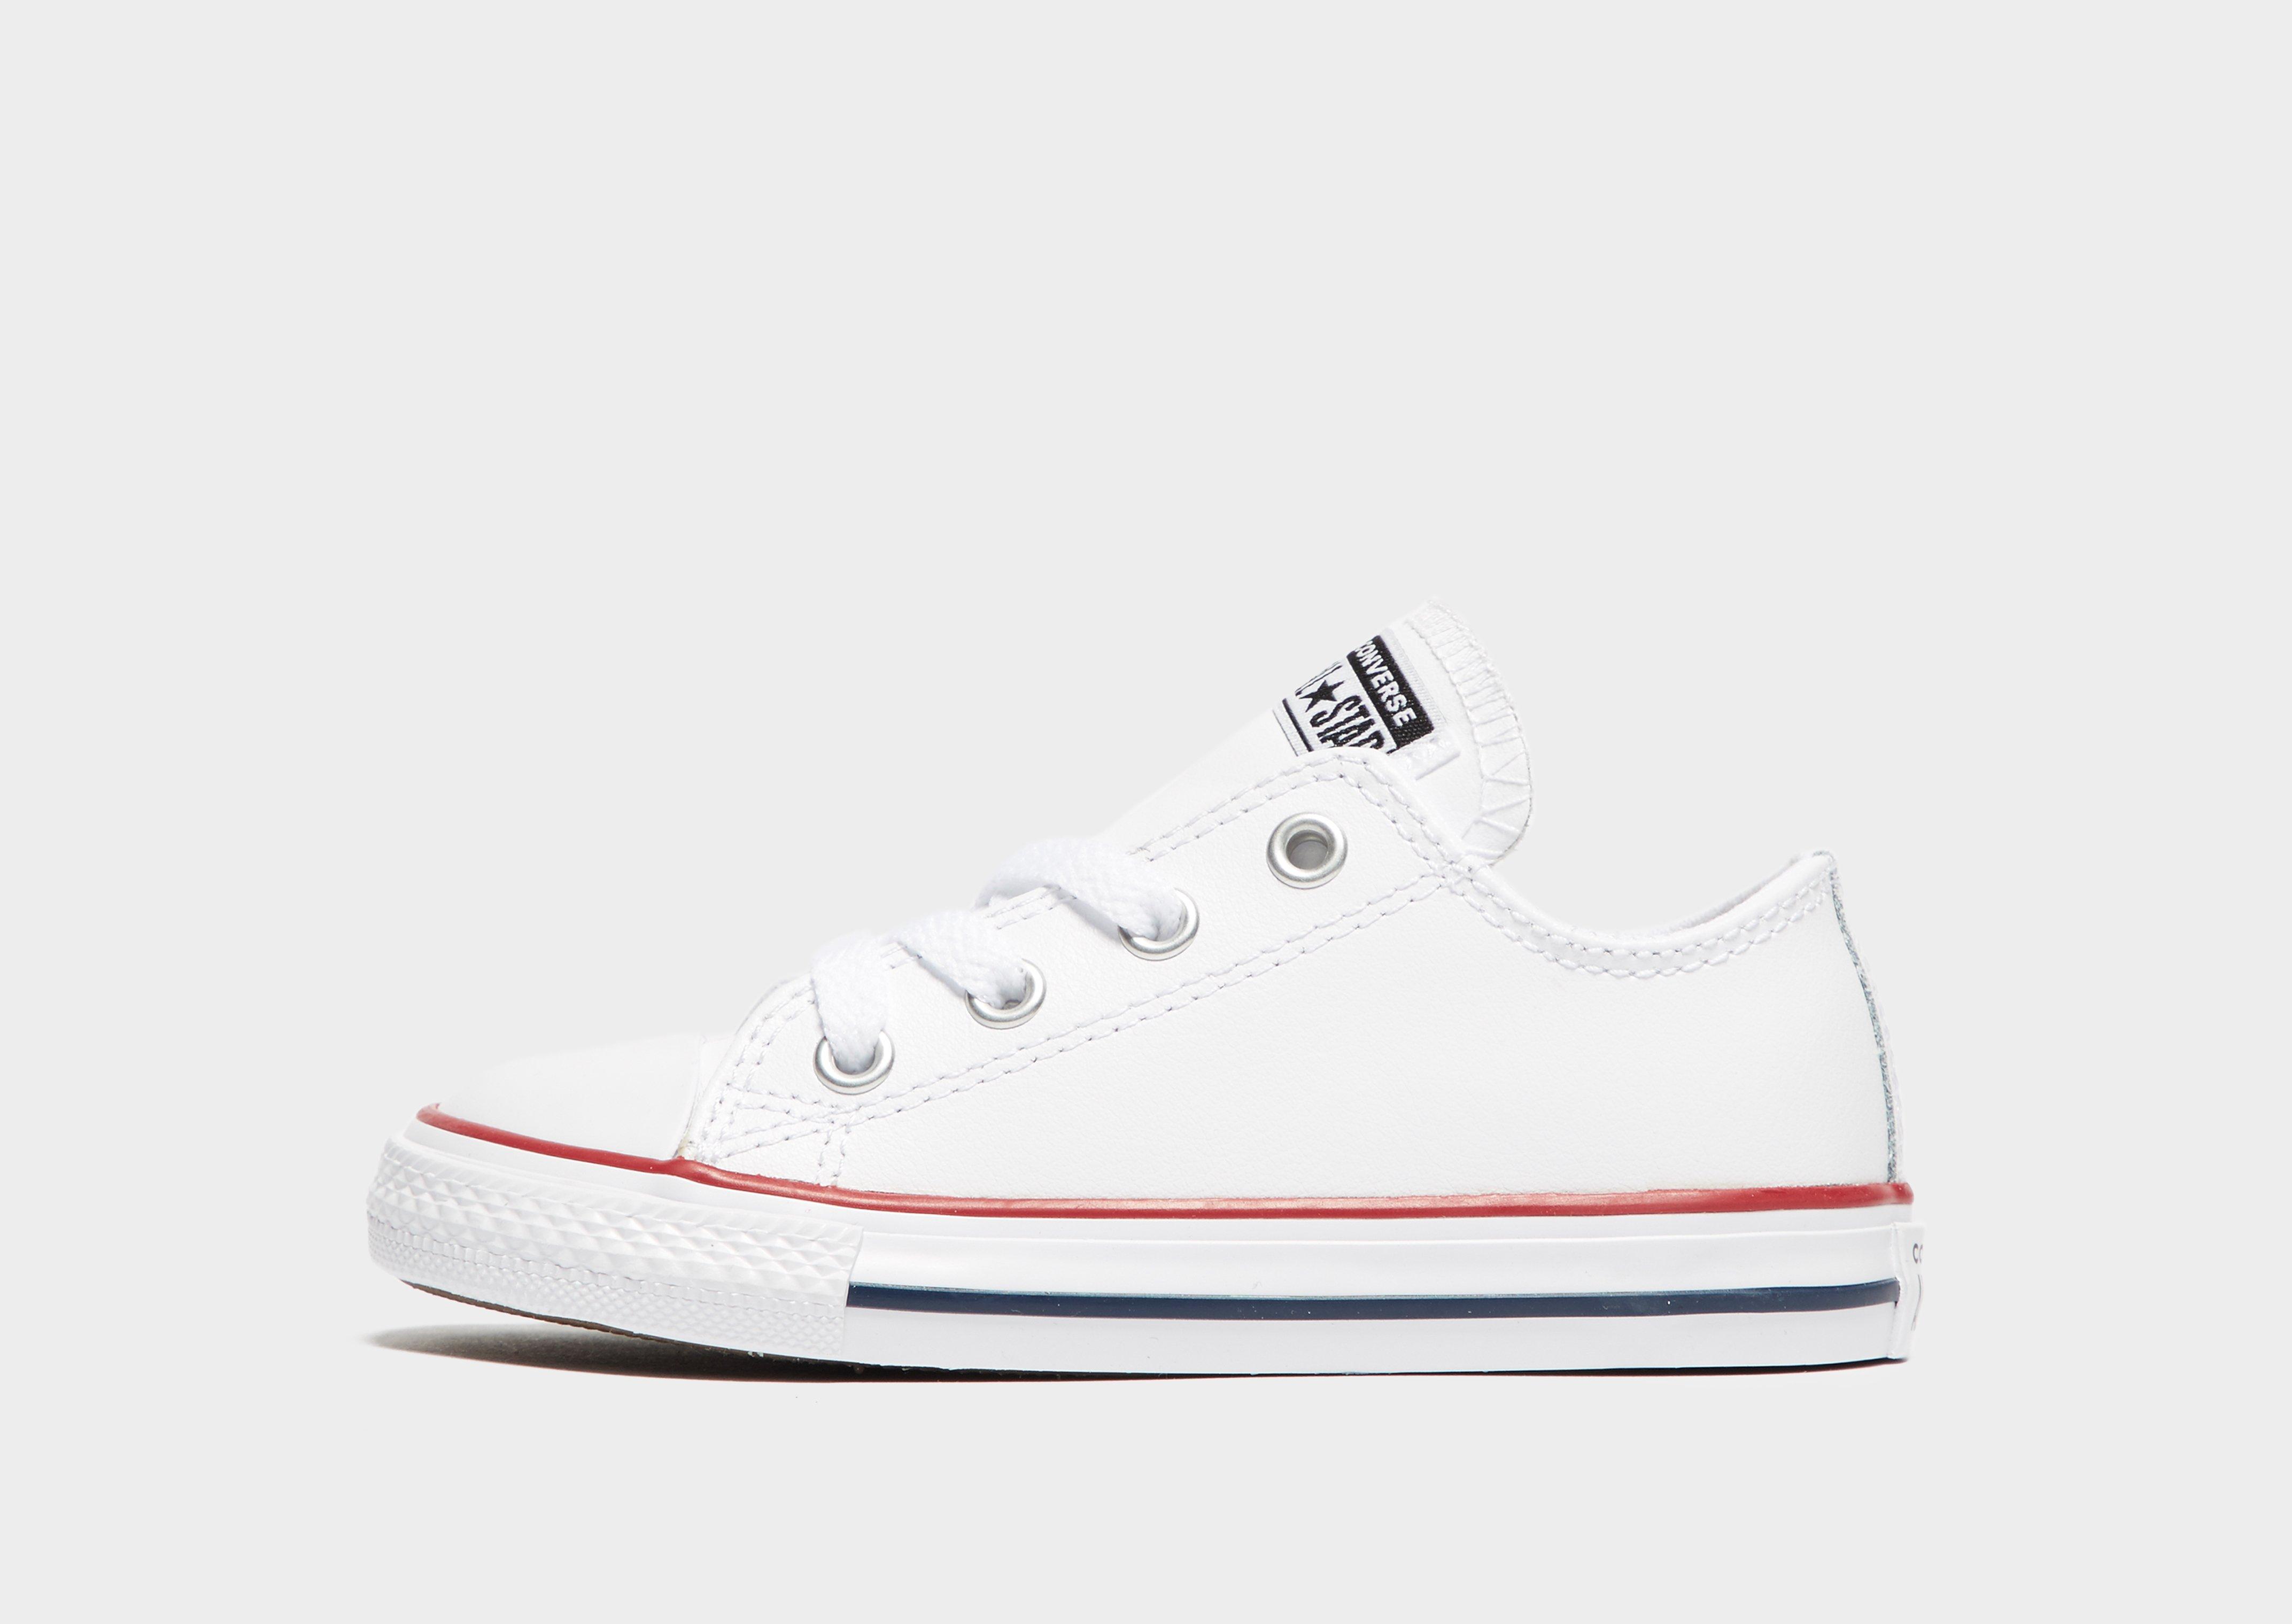 converse fille taille 26